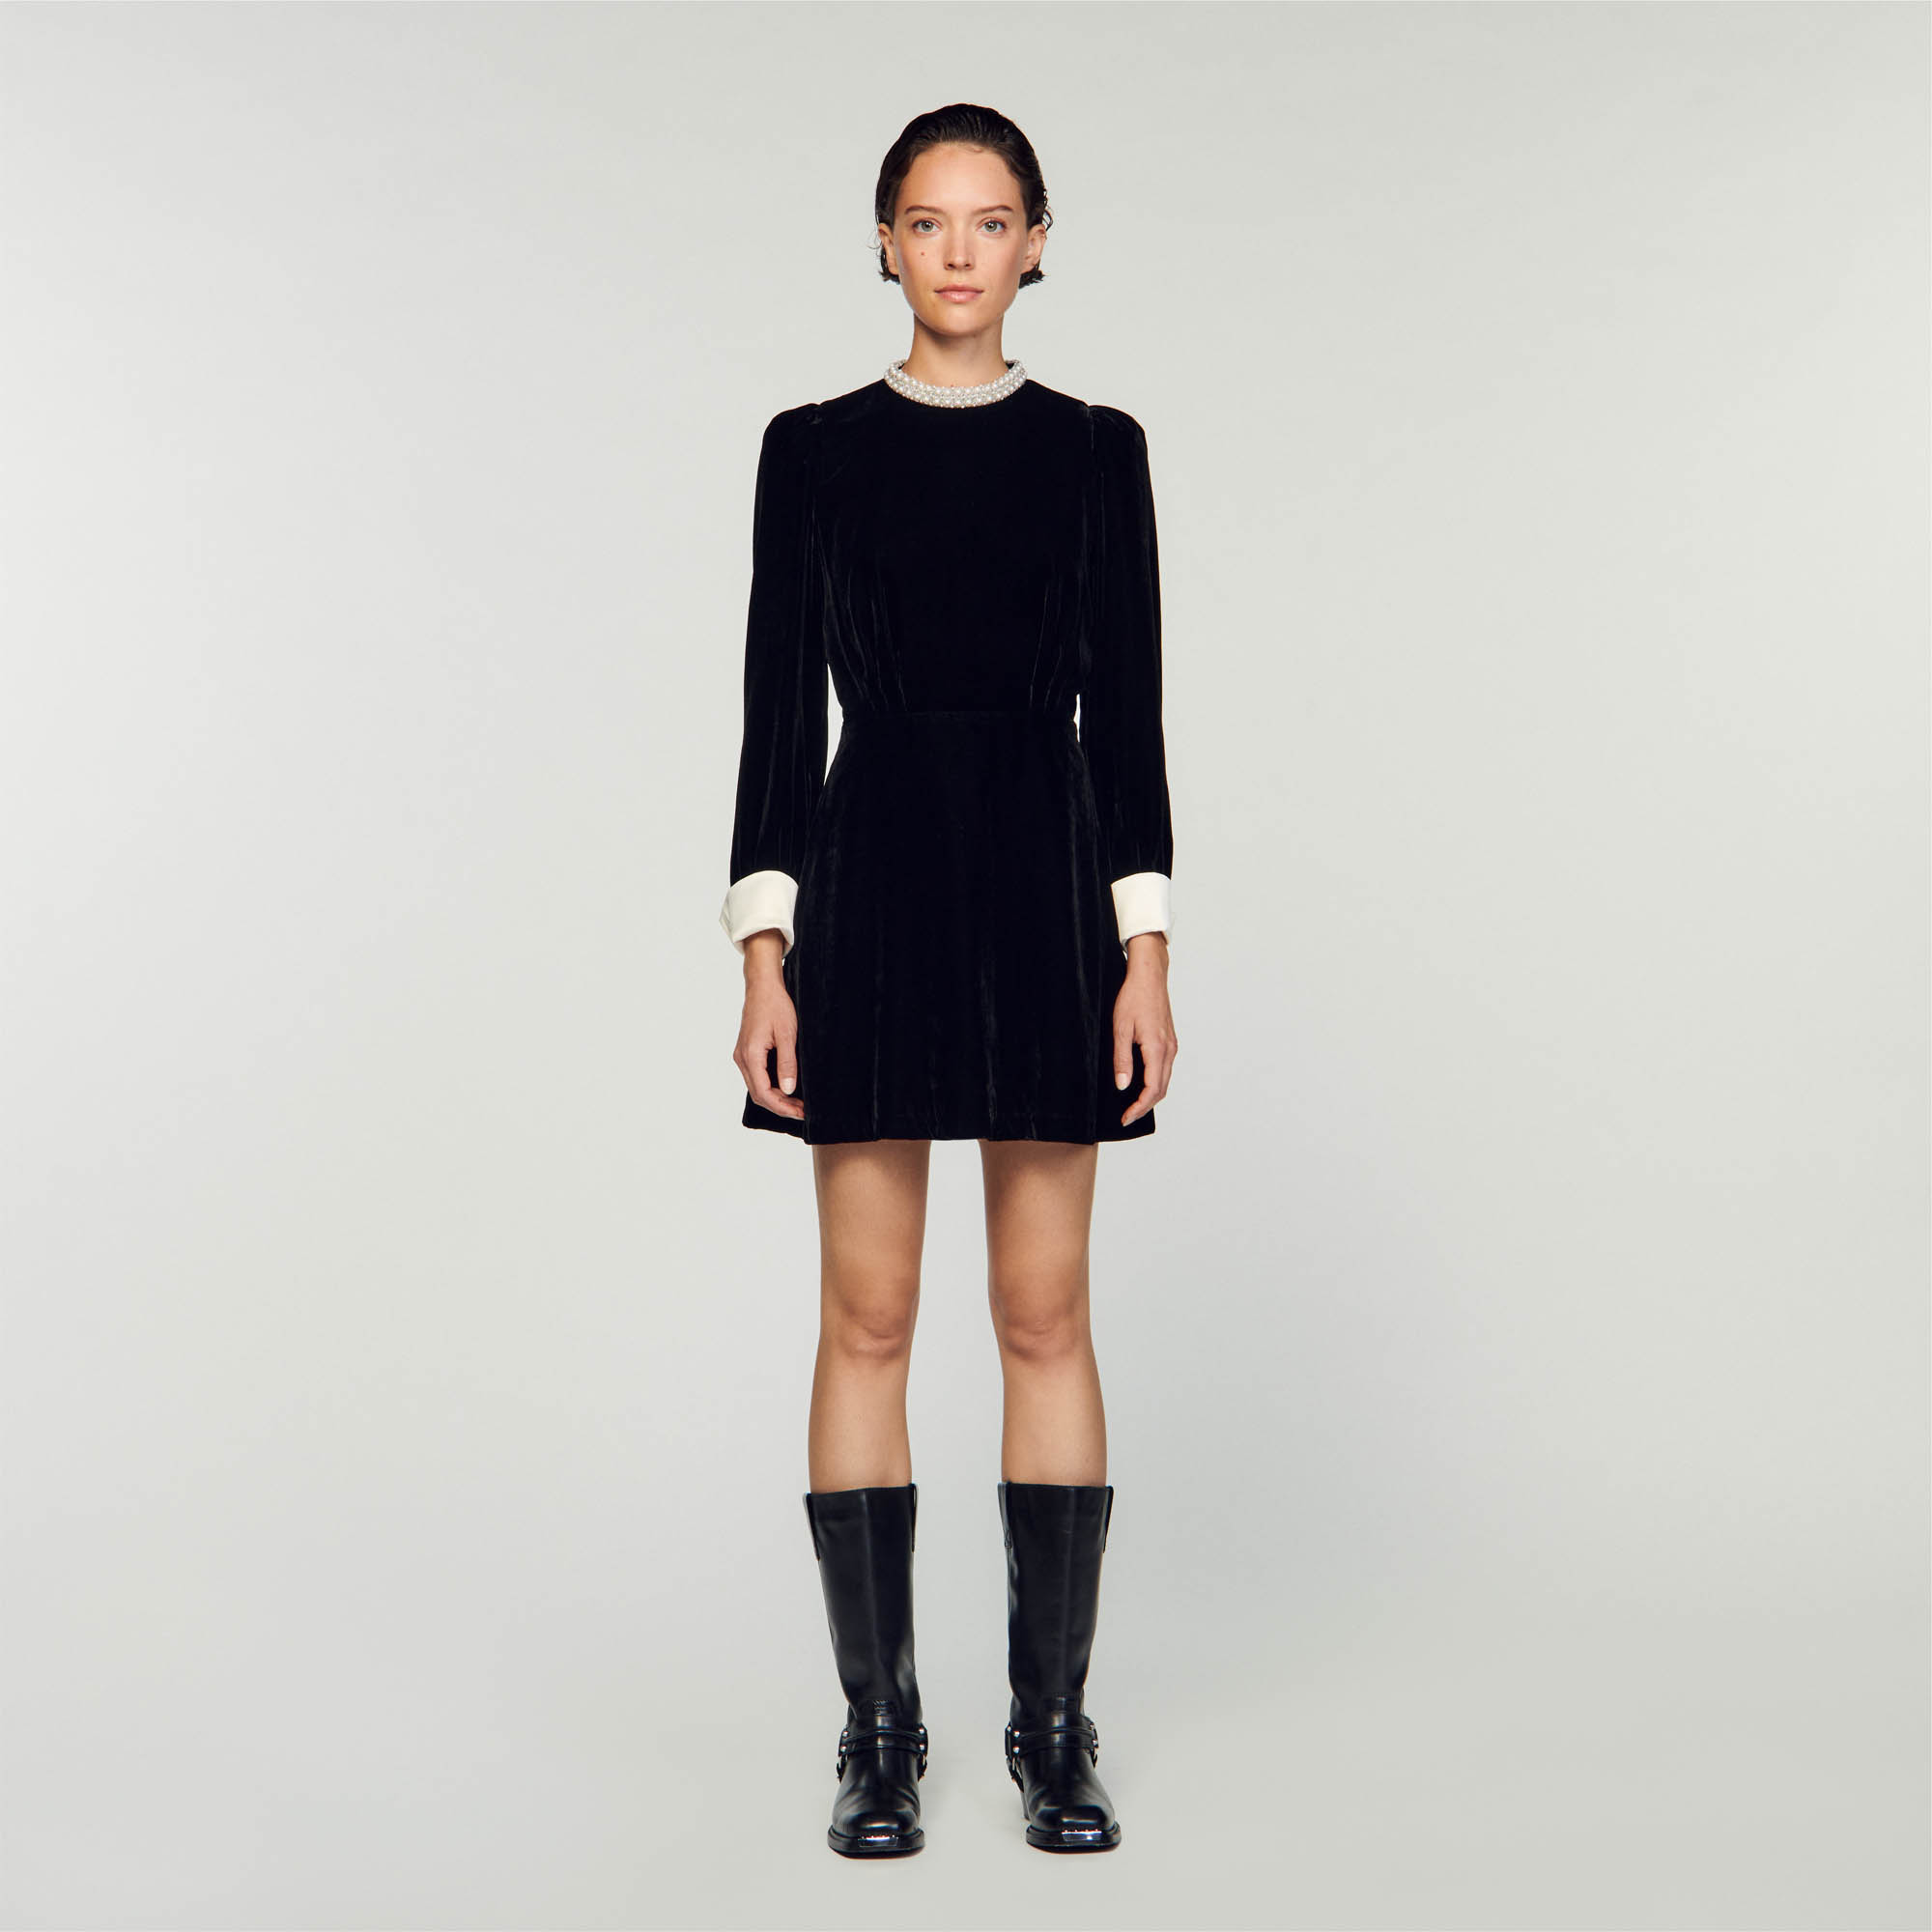 Sandro viscose Short velvet dress featuring a beaded neck, long sleeves with satin-effect button cuffs and a flared skirt